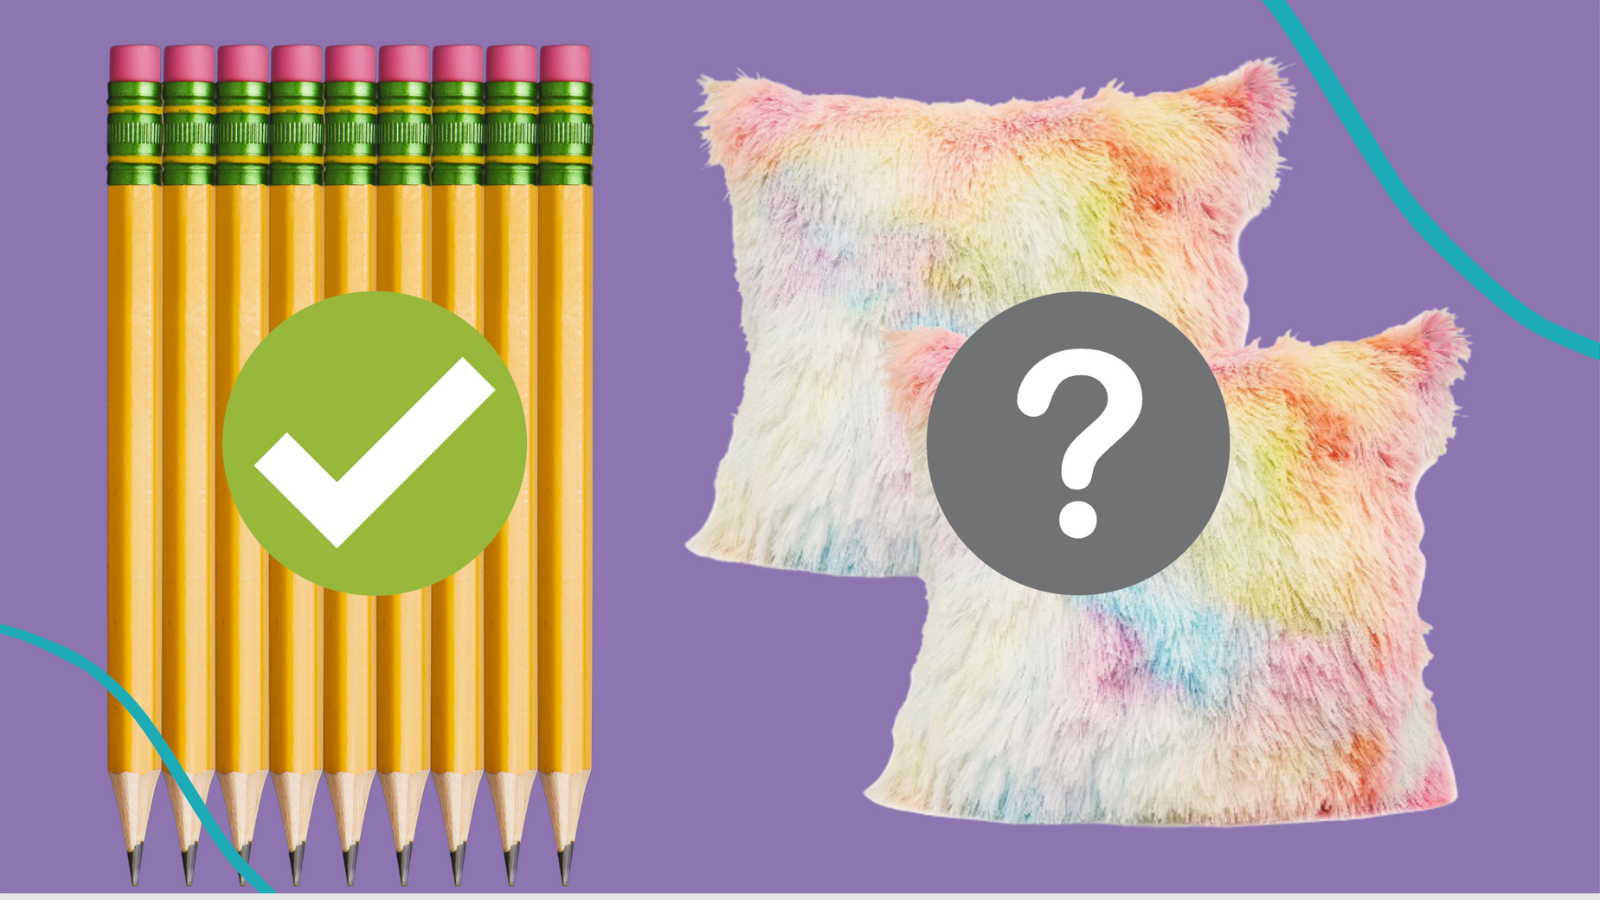 Two school supplies showing teachers are divided on whether to put fun decor on wishlists